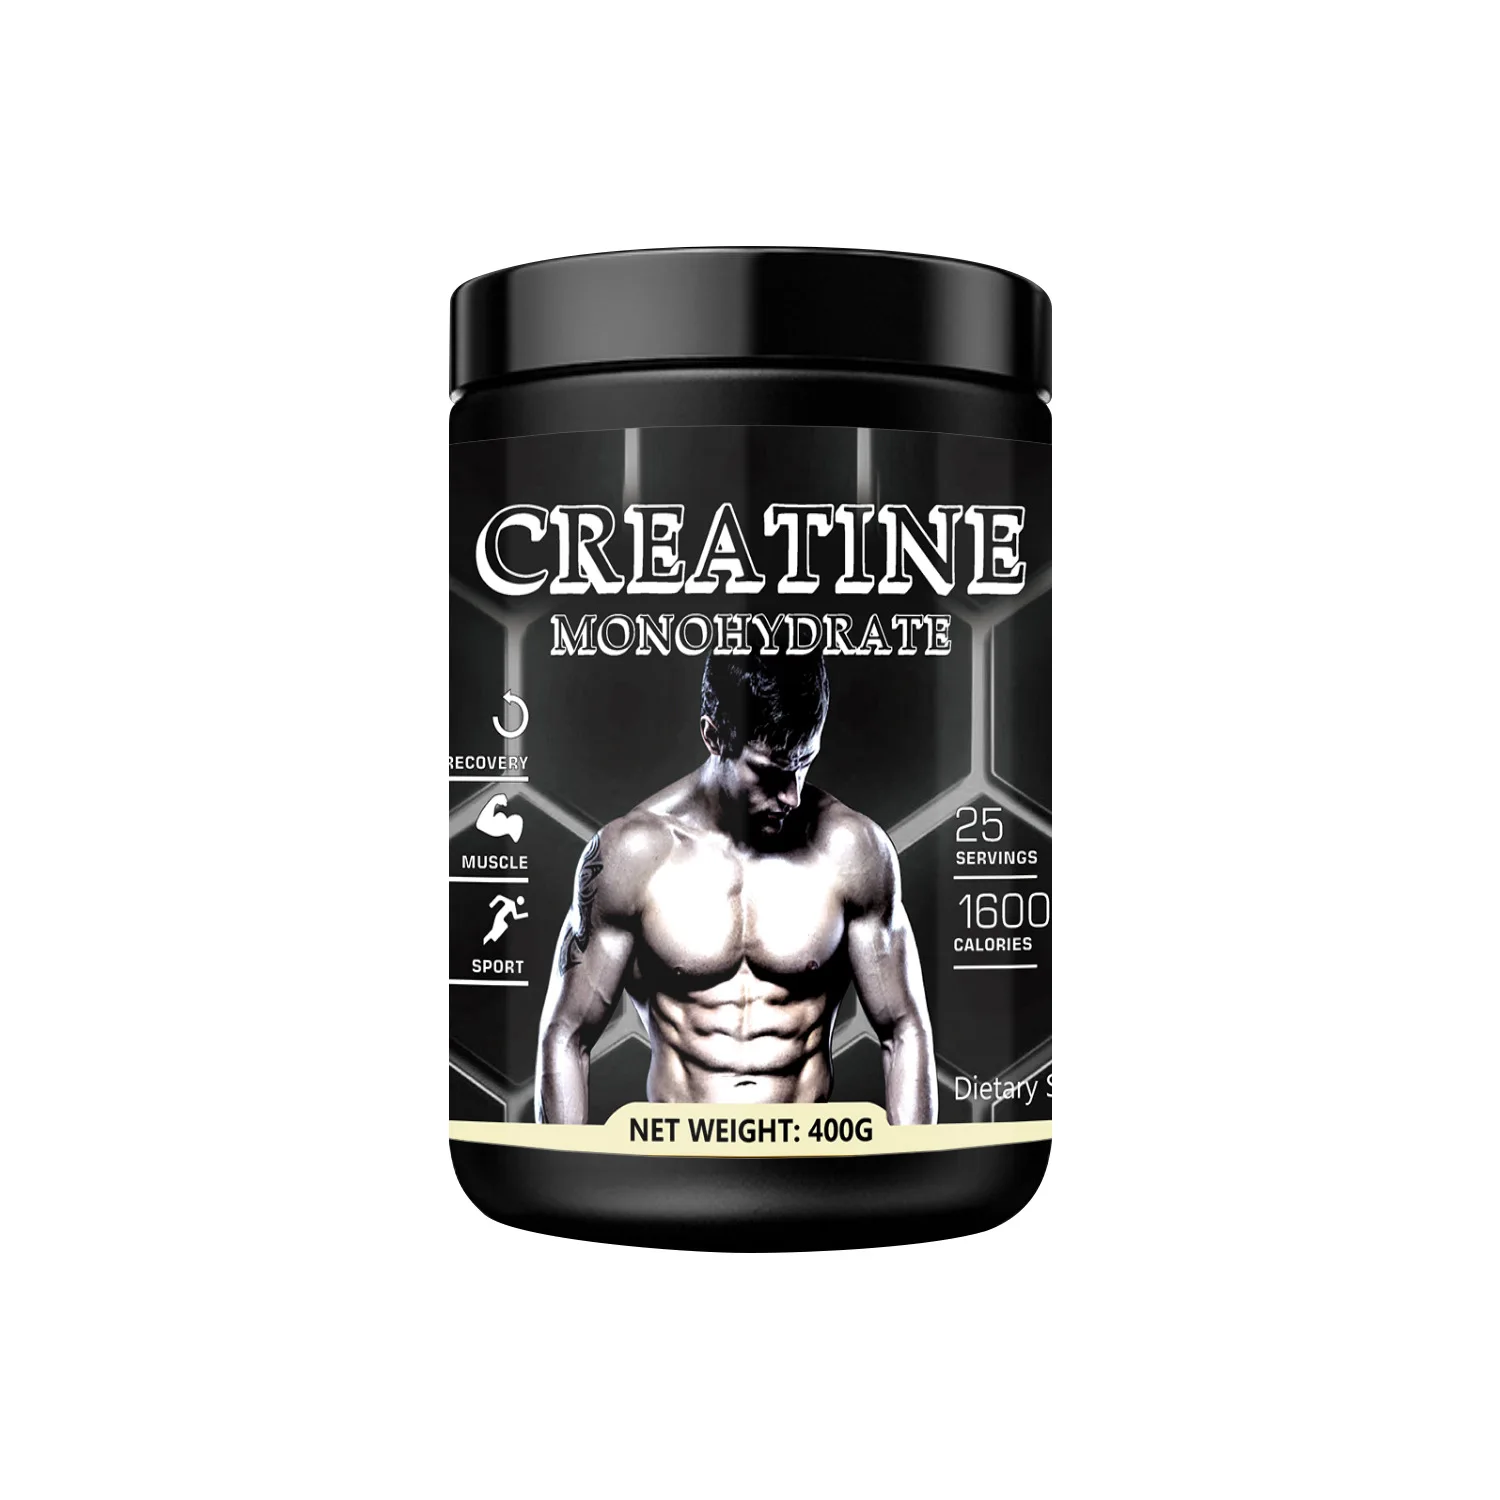 

Creatine Monohydrate Pow-der Capsule Whey Protein for Gym Energy Endurance Performance Enhance Muscle Growth Supplenent